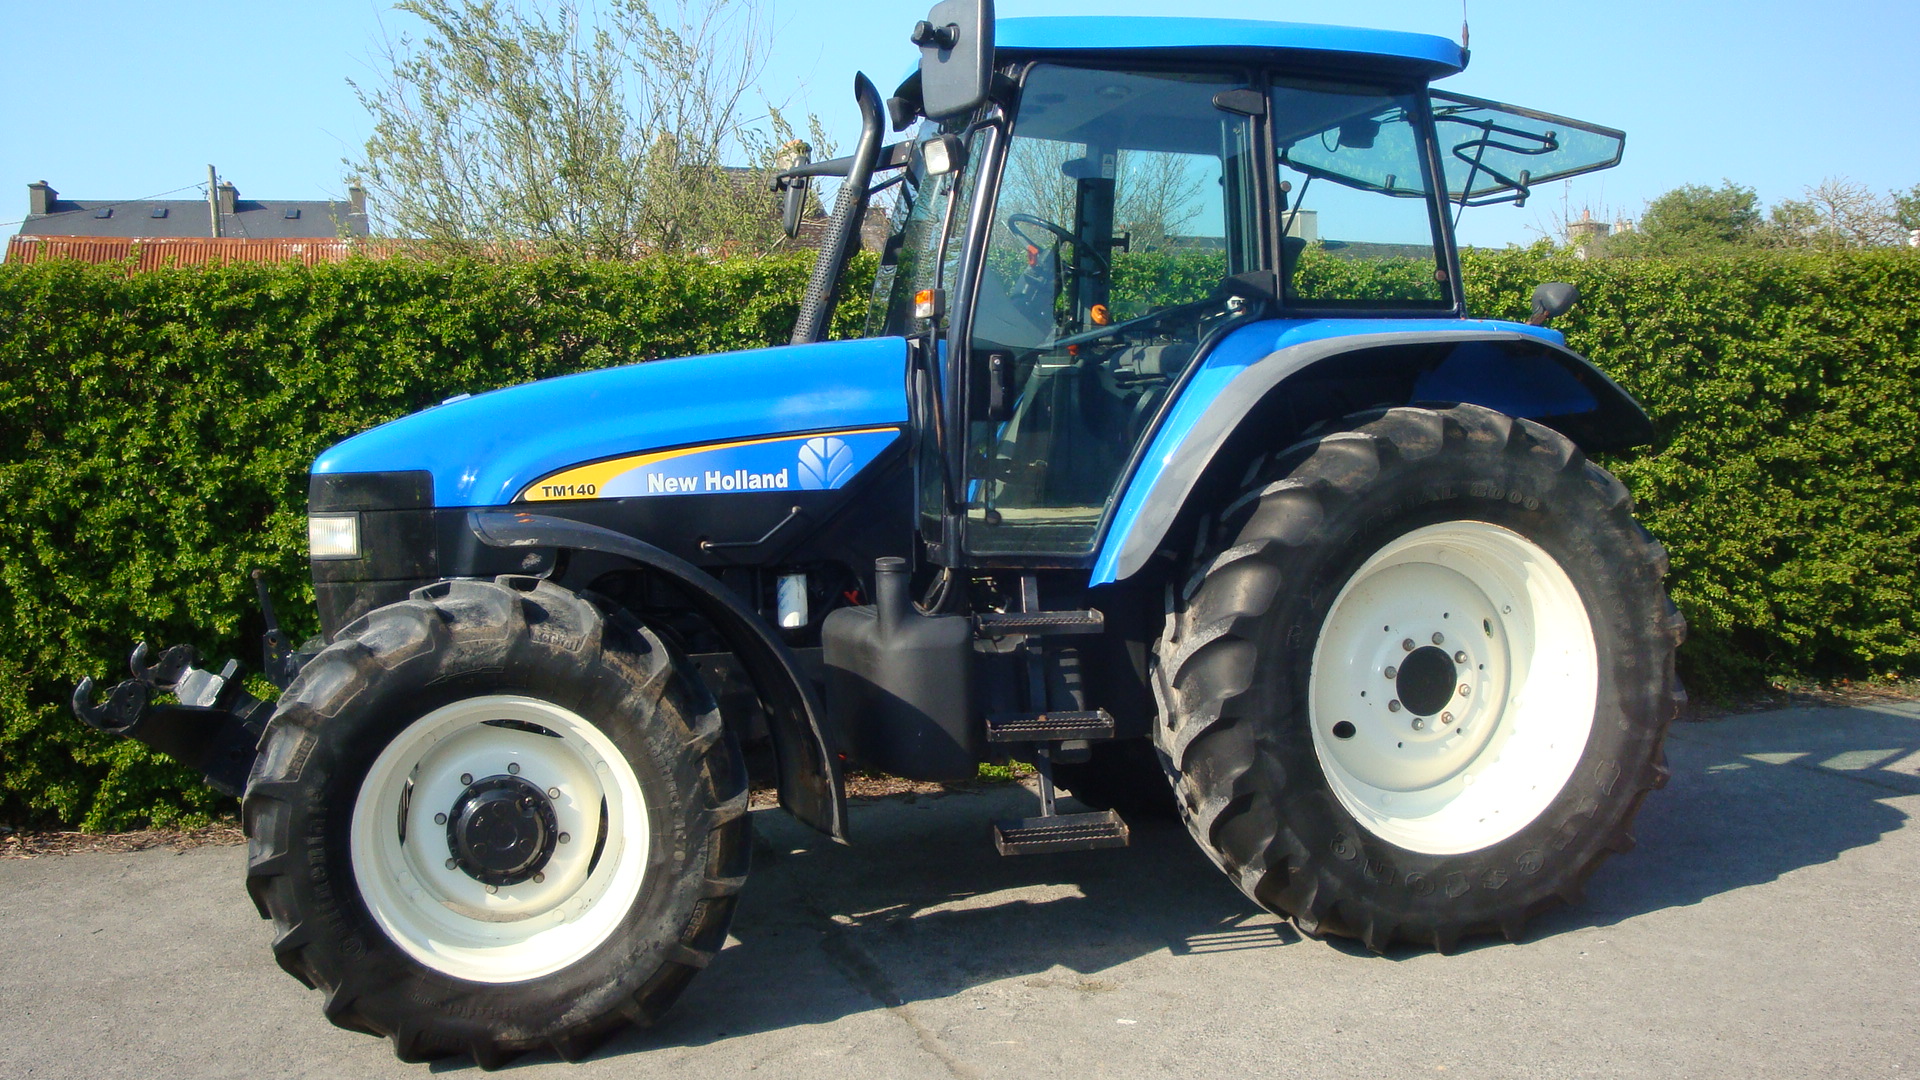 Home » Used Tractors » New Holland TM140